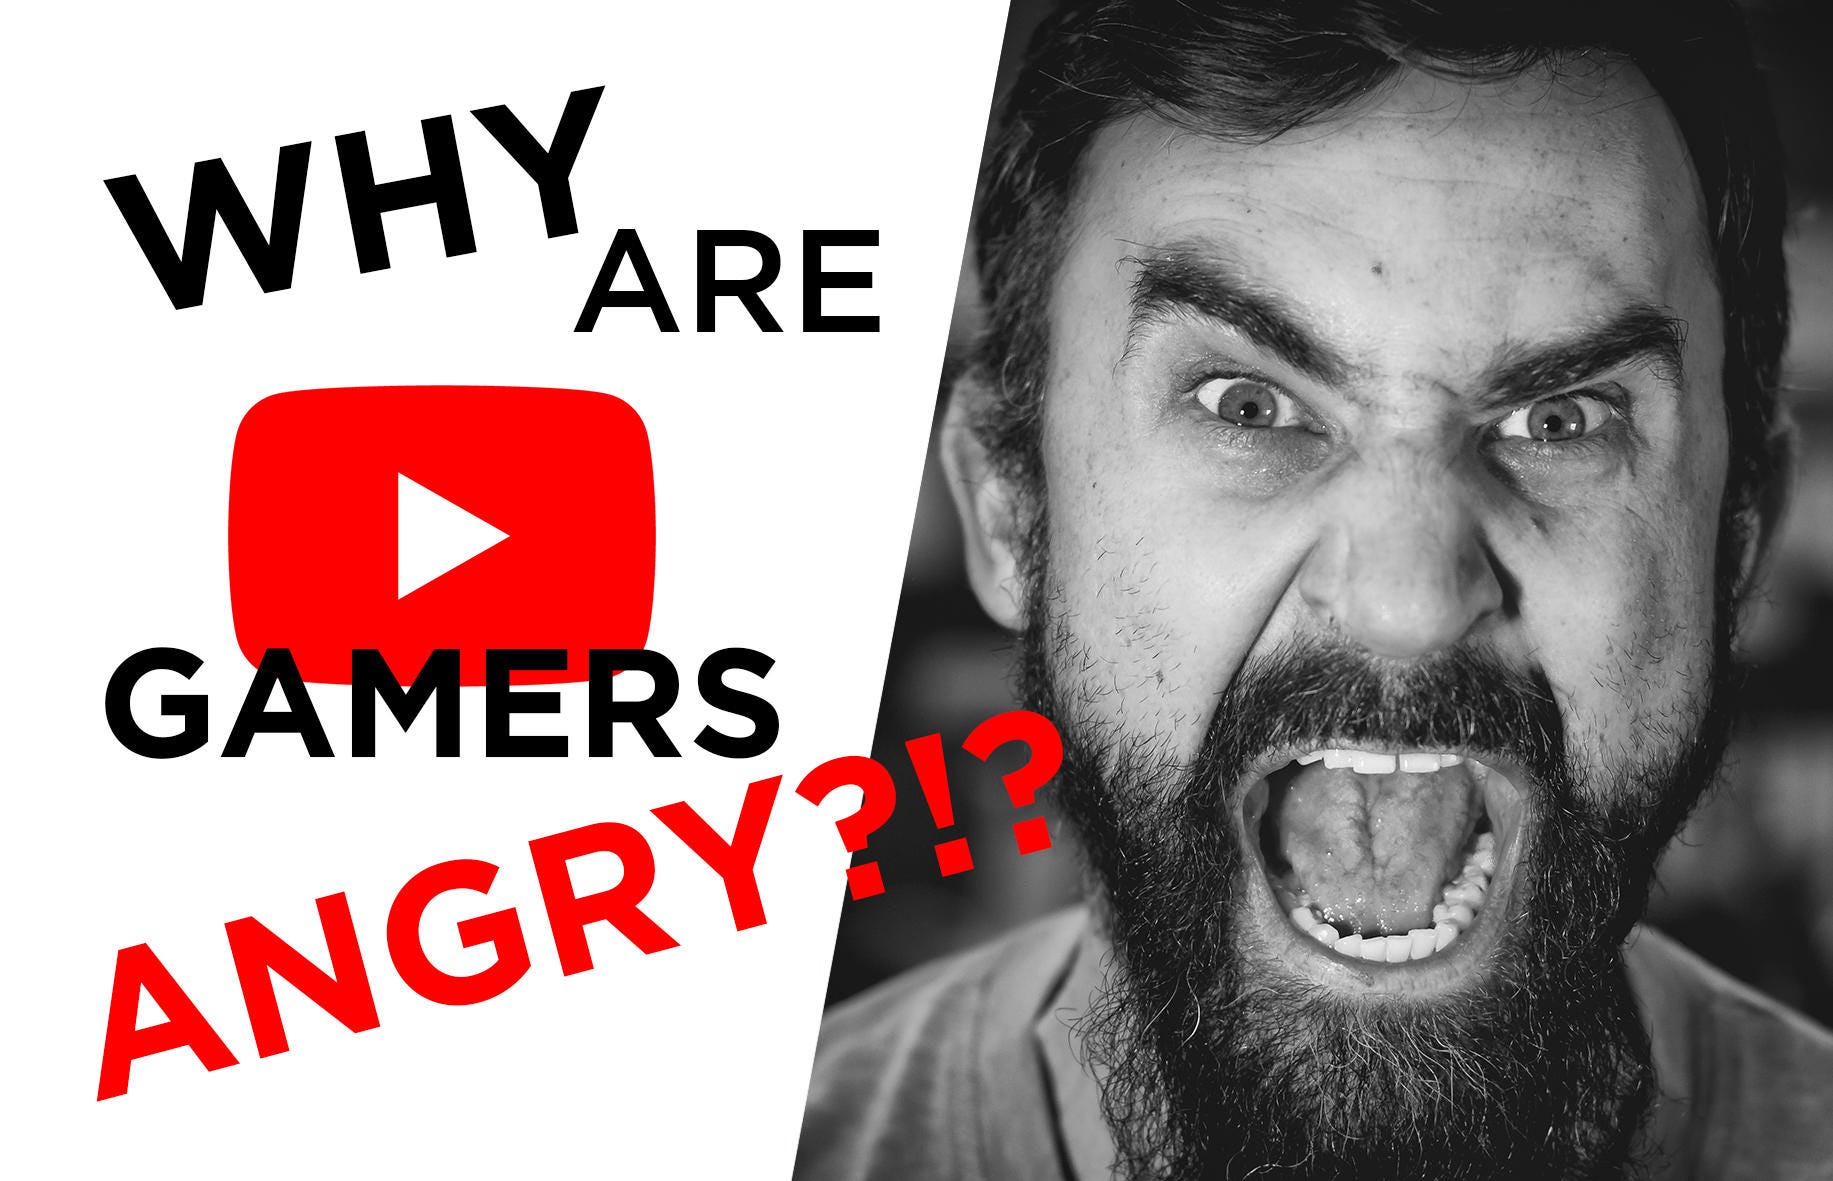 Meet The Angry Gaming Youtubers Who Turn Outrage Into Views Cnet - donlad trump wants roblox gone